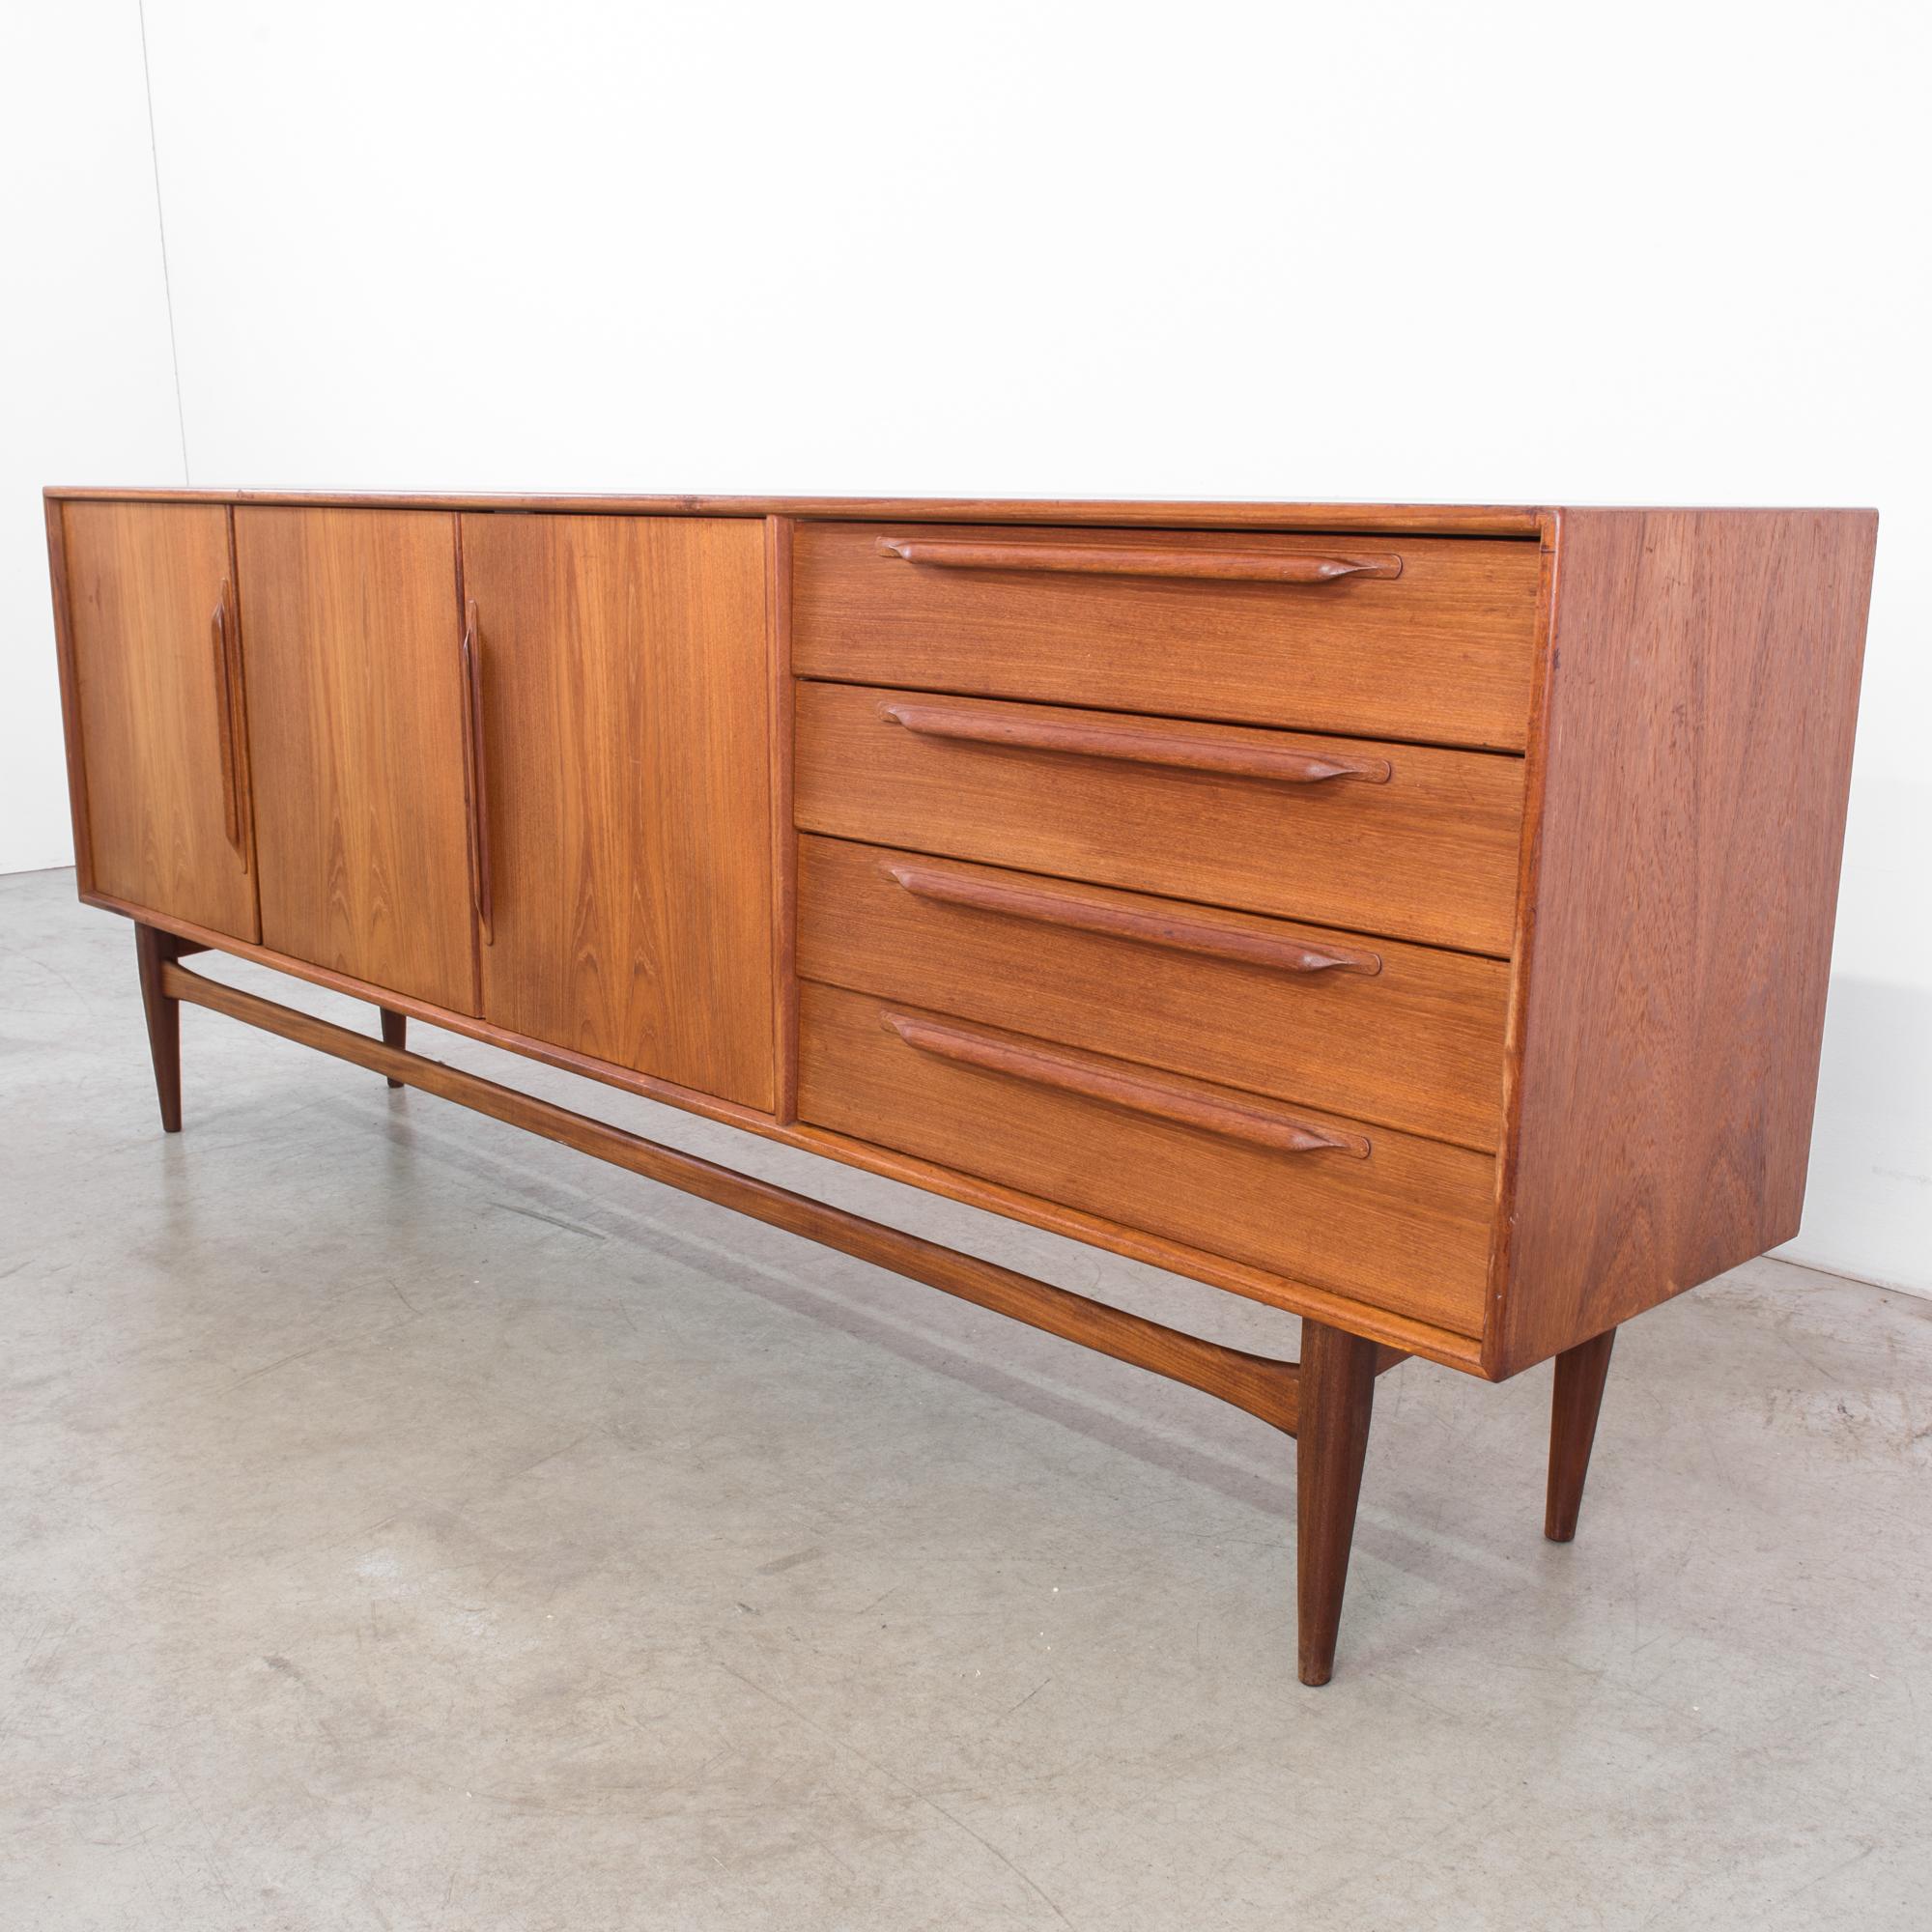 The quintessential vintage sideboard from Germany, circa 1960. A chic chest with three cabinets and four drawers. Measuring over seven feet long this sideboard has style for days. The cool, clean lines of this timeless profile makes you want to grab